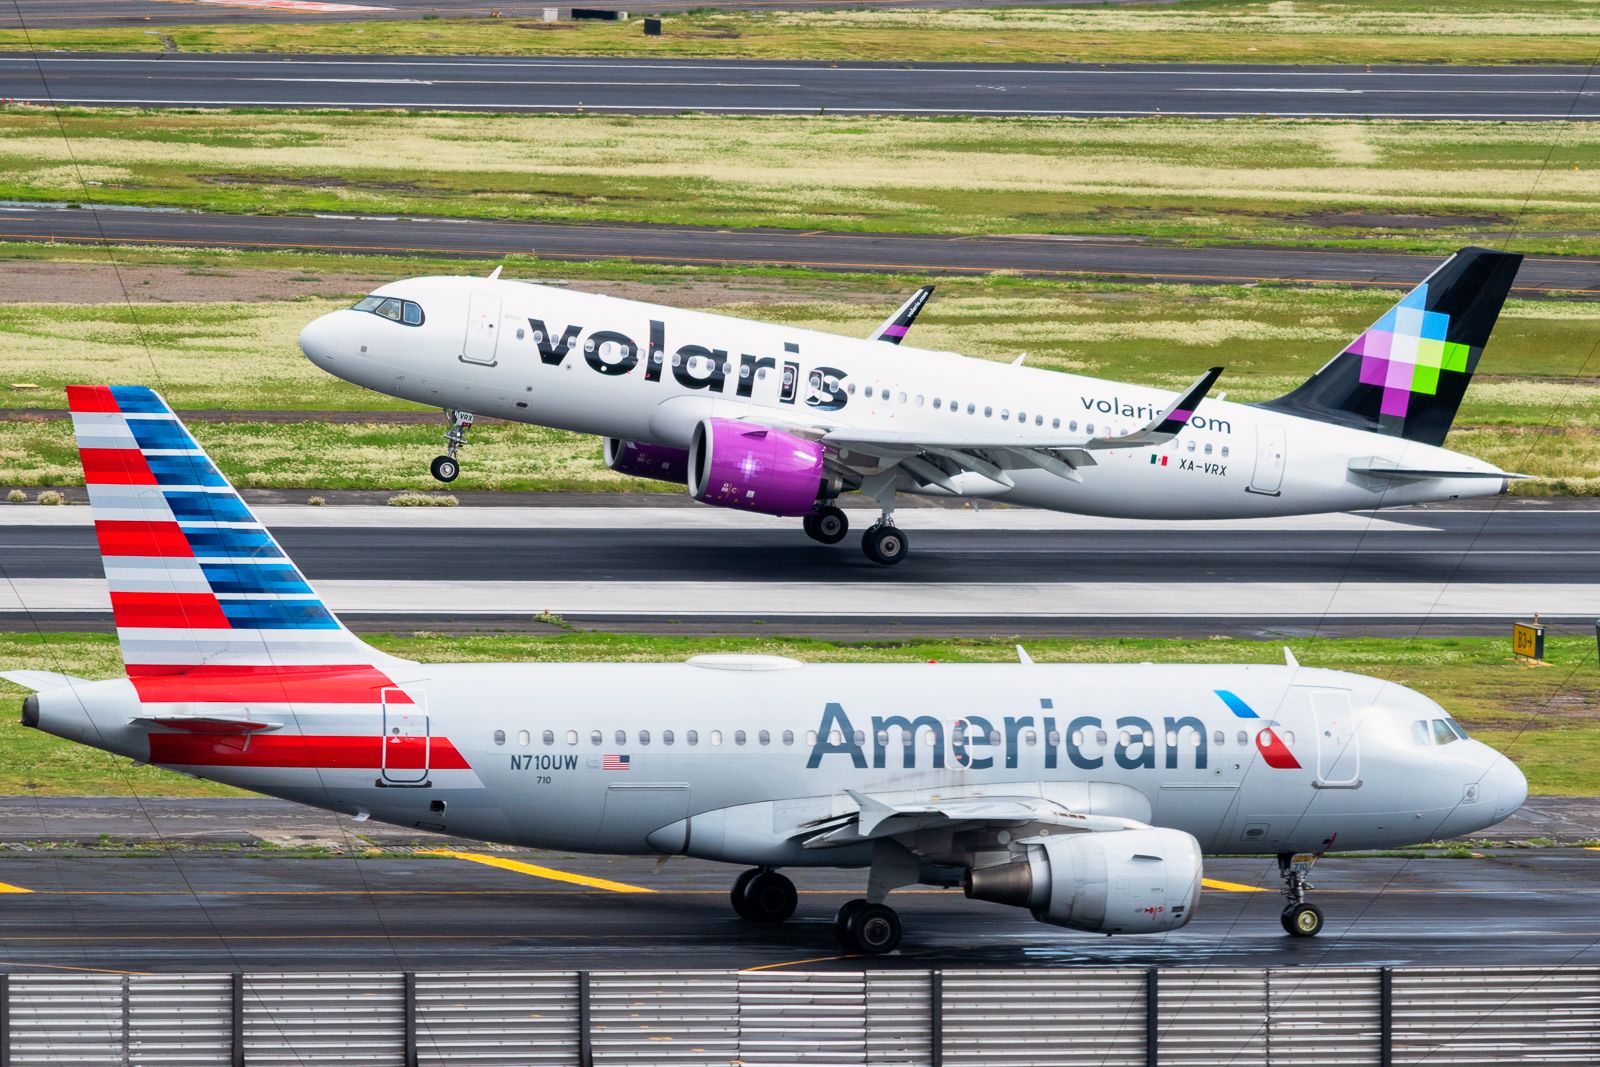 An American Airlines taxiing in Mexico City; in the back a Volaris aircraft can be seen landing.